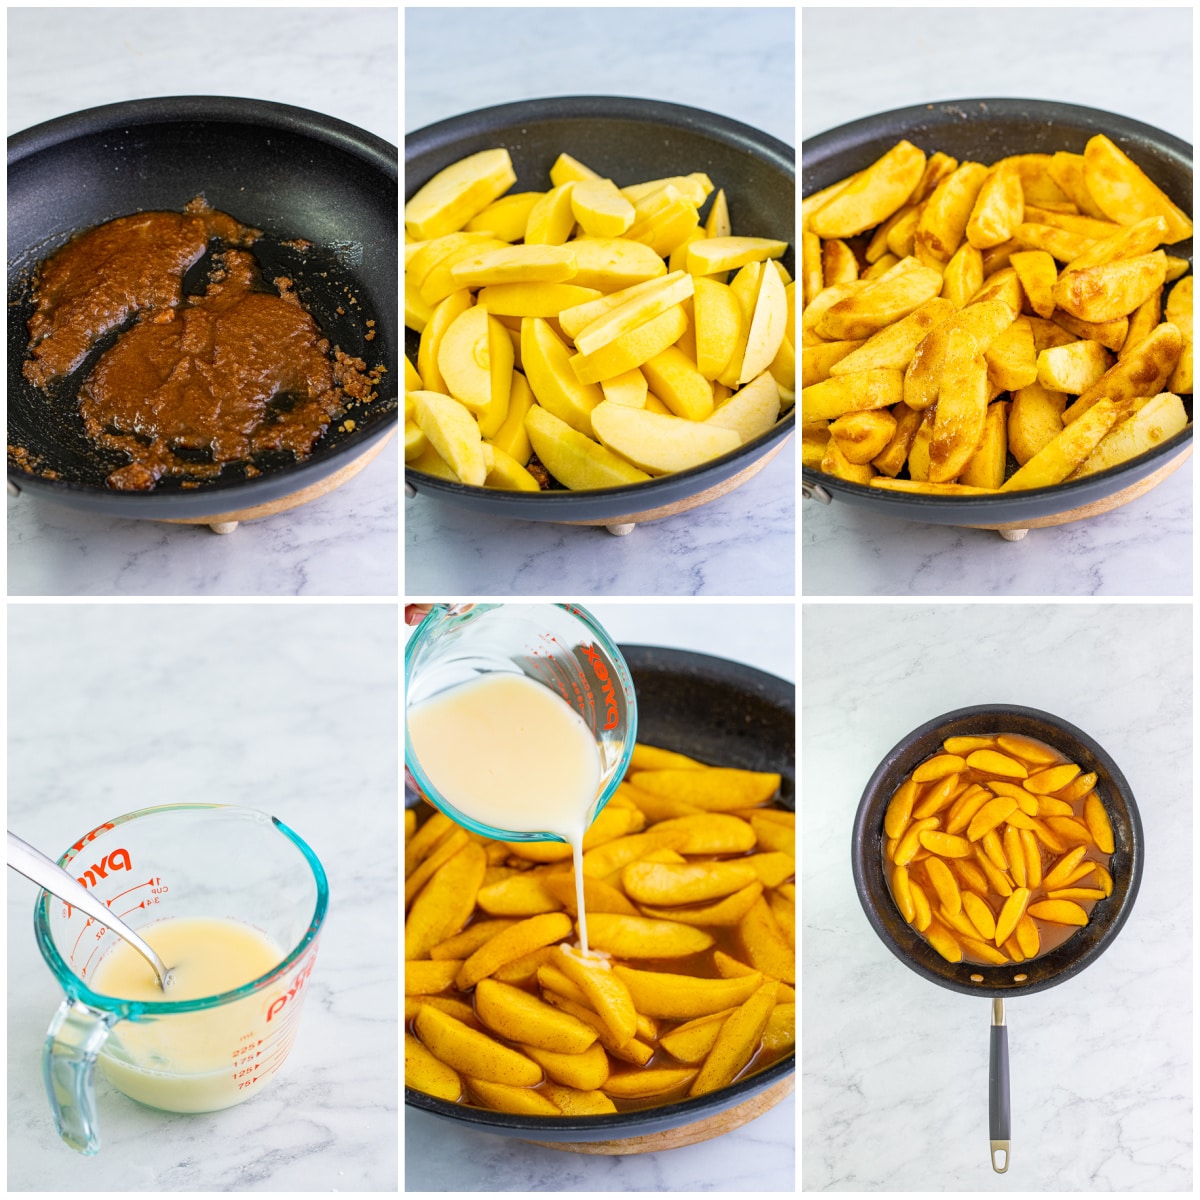 Step by step photos on how to make Cracker Barrel Fried Apples.